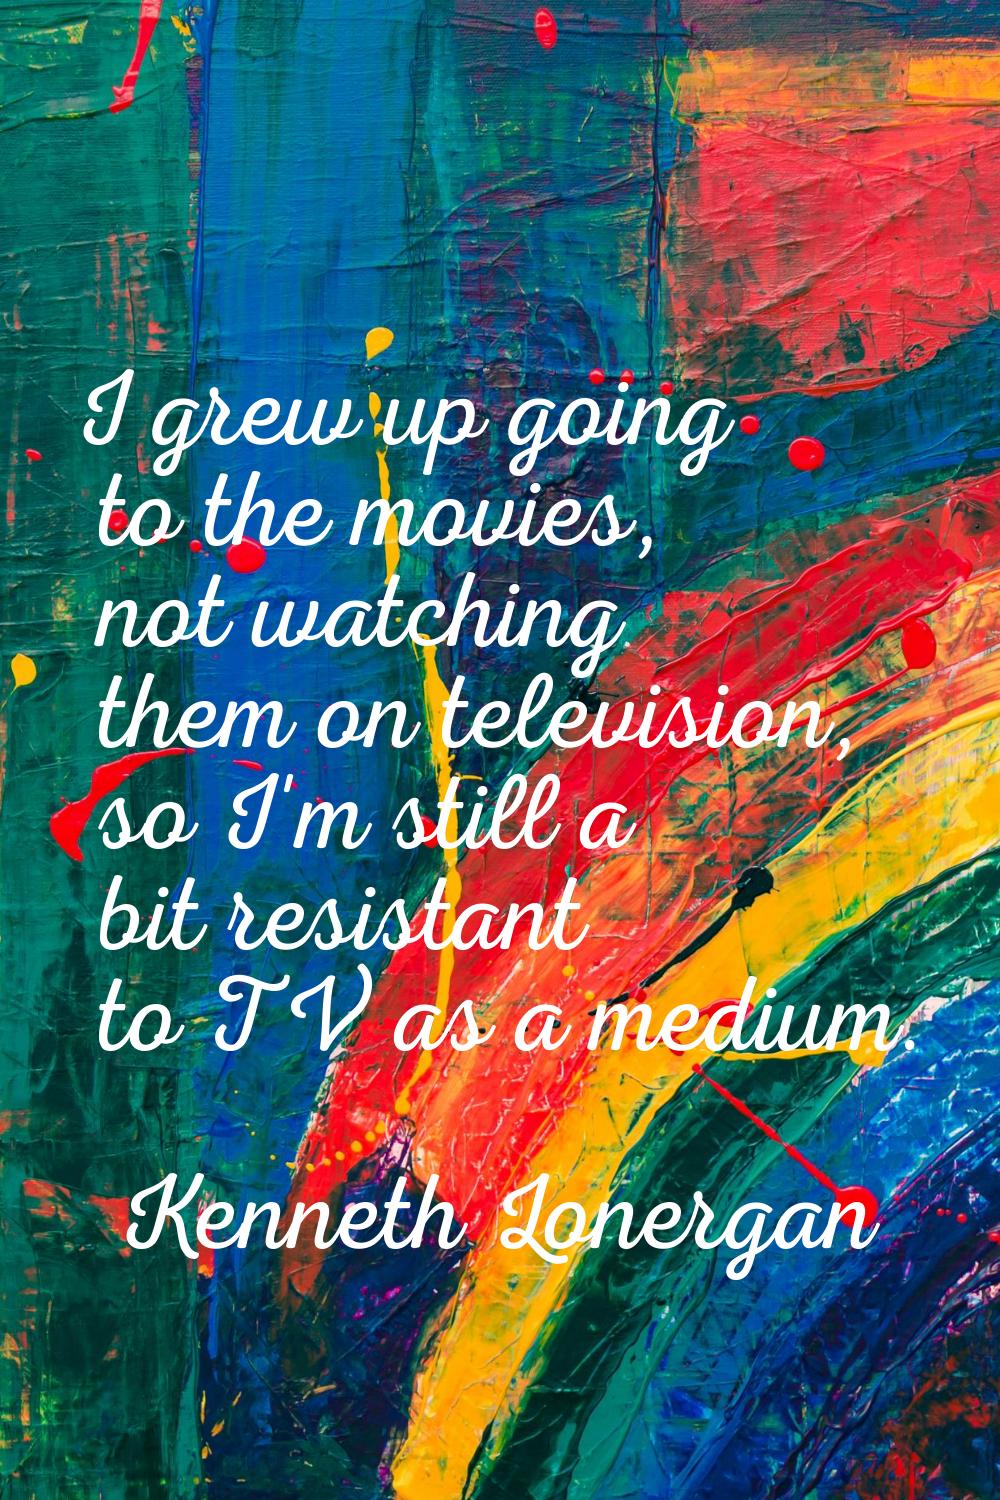 I grew up going to the movies, not watching them on television, so I'm still a bit resistant to TV 